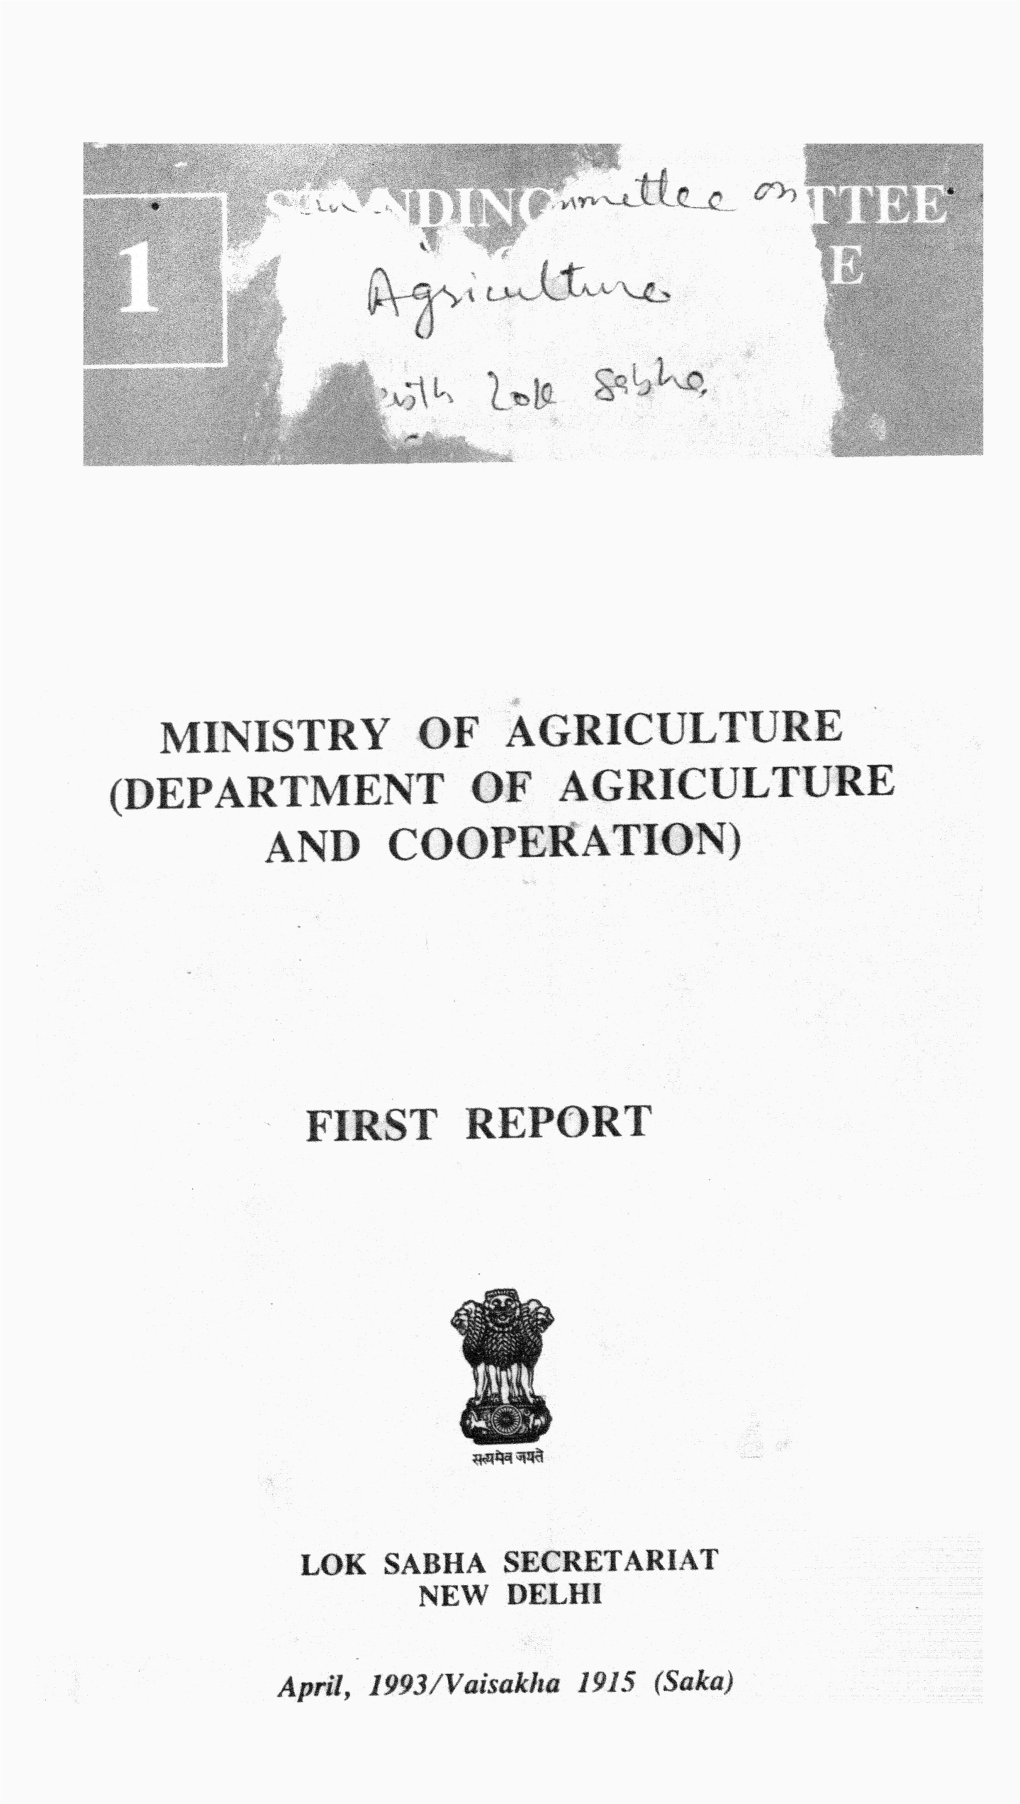 Ministry of Agriculture ' (Department of Agriculture and Cooperation)